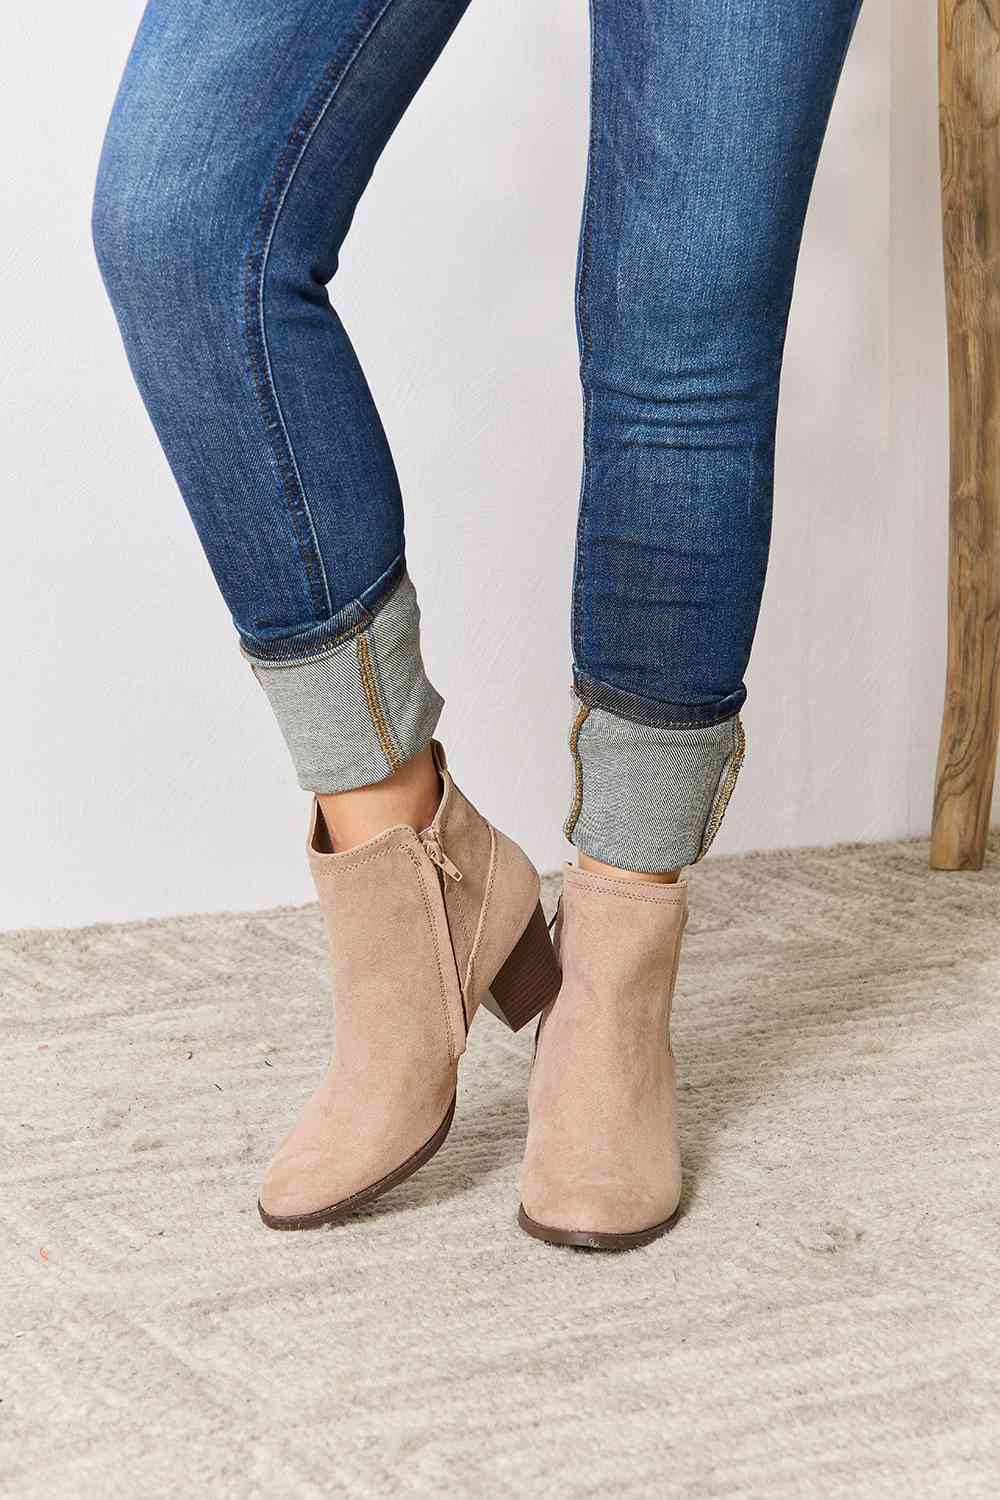 East Lion Corp Block Heel Point Toe Ankle Boots - Fashion Girl Online Store